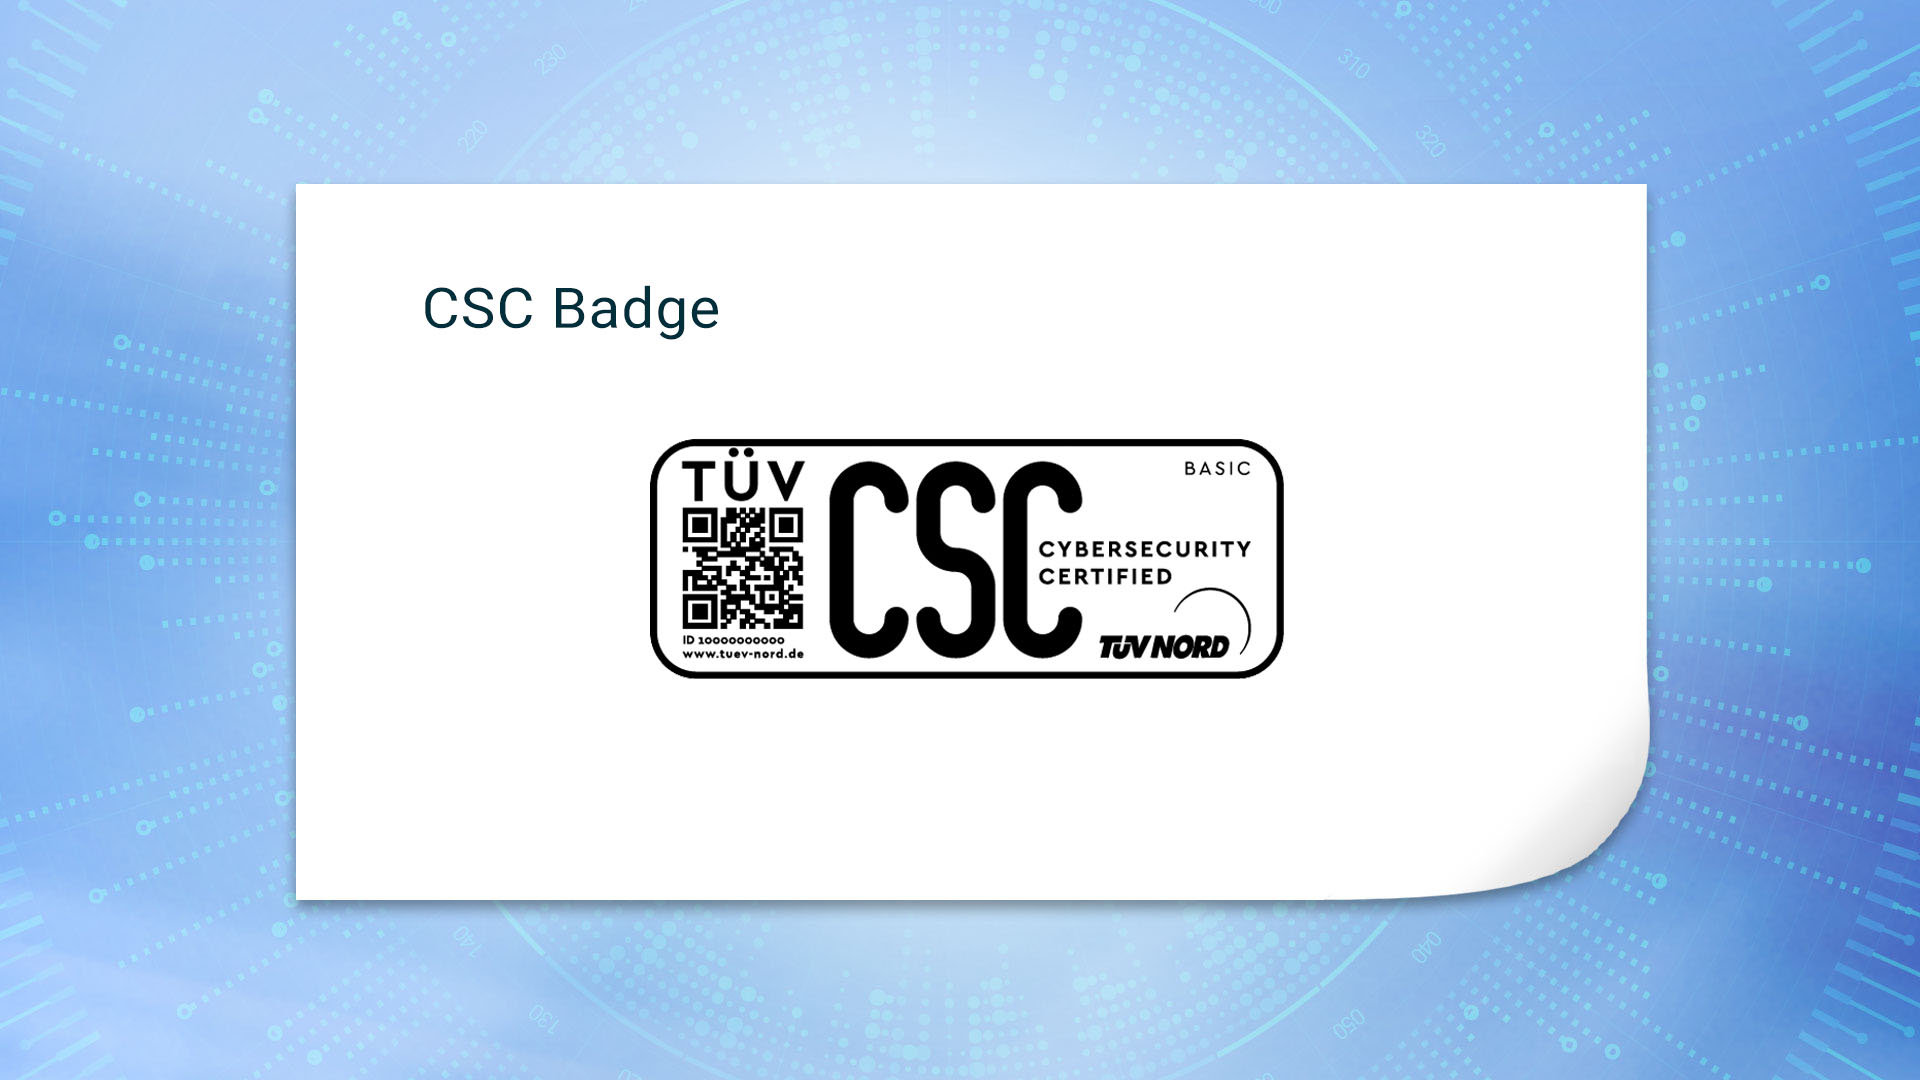 CSC 'Cybersecurity Certified' label